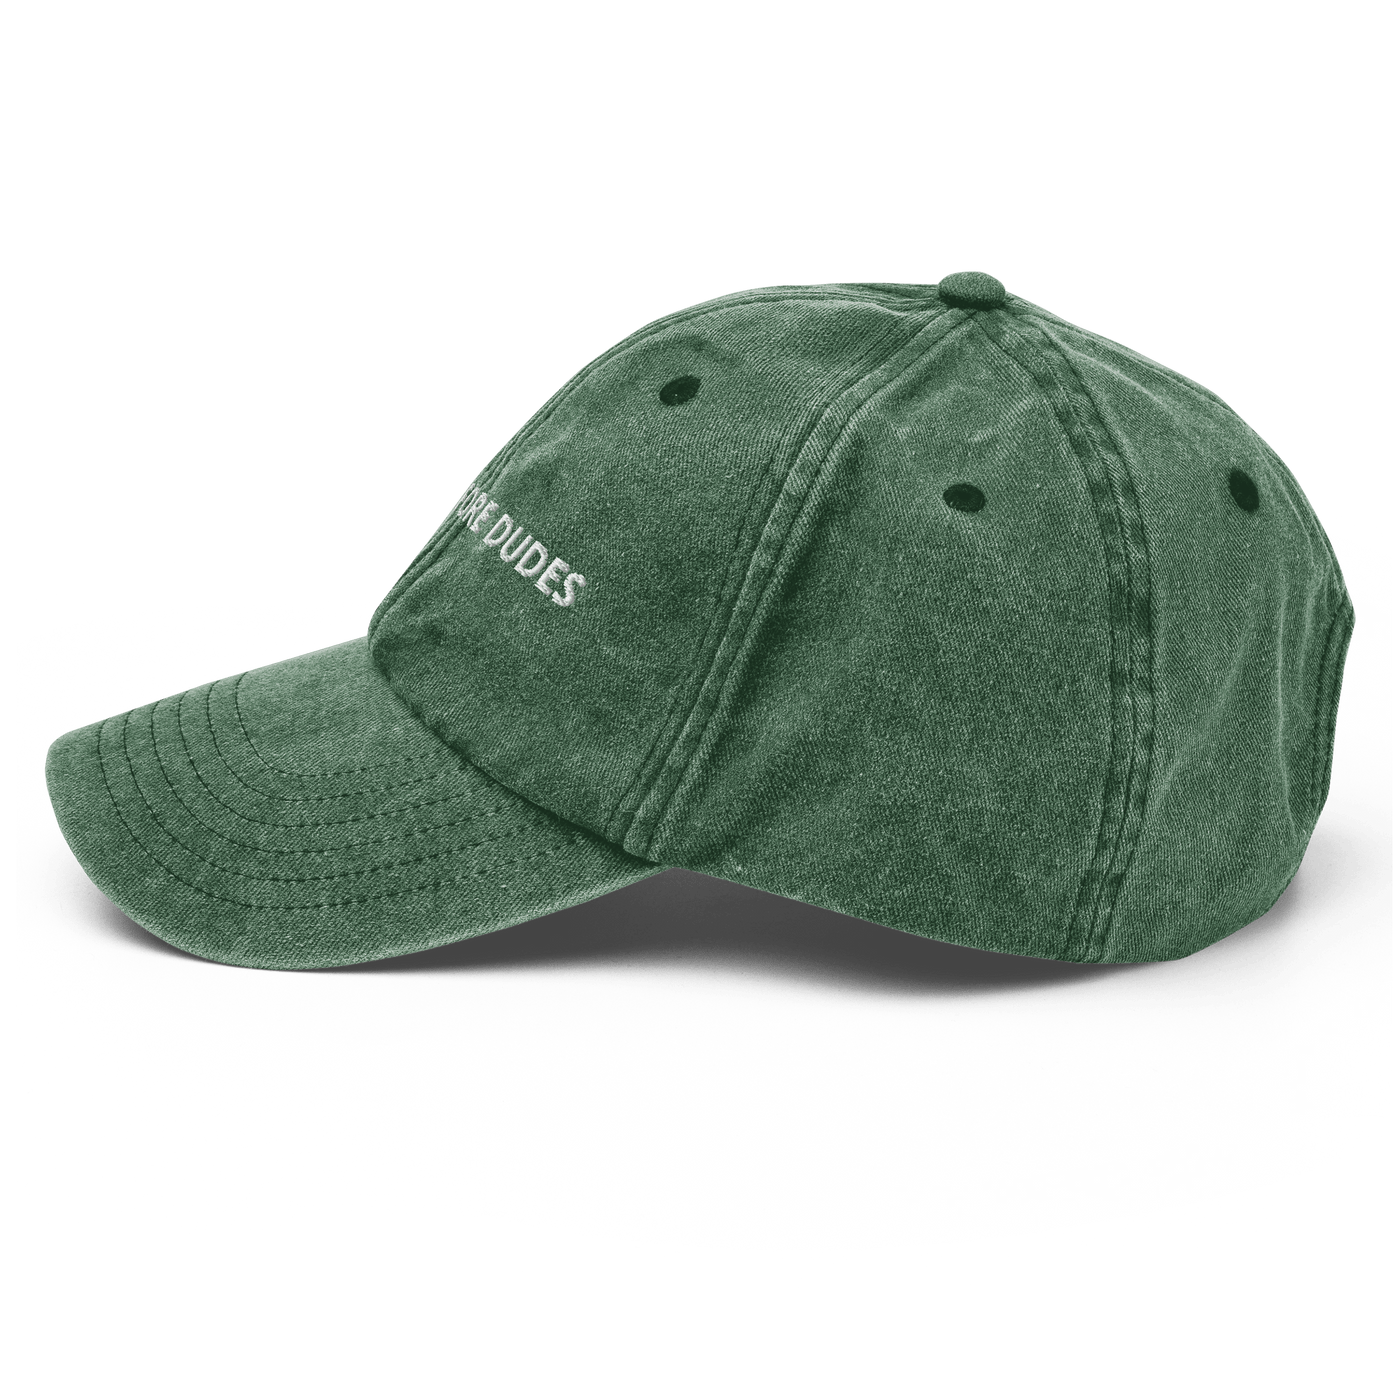 Dogs before Dudes Vintage Hat - Vintage Bottle Green - - Just Another Cap Store